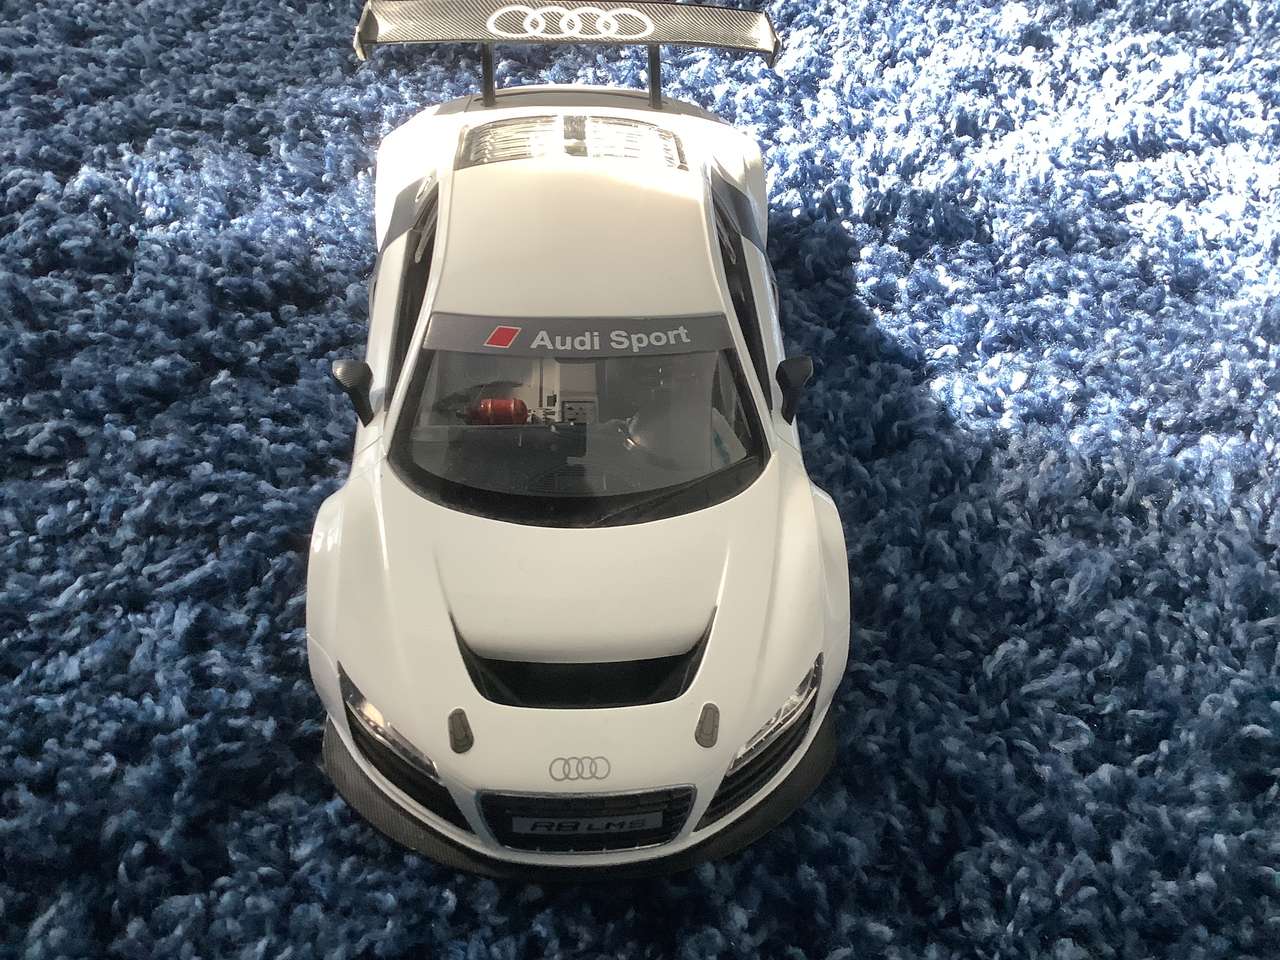 Puzzle Audi R8 puzzle online from photo